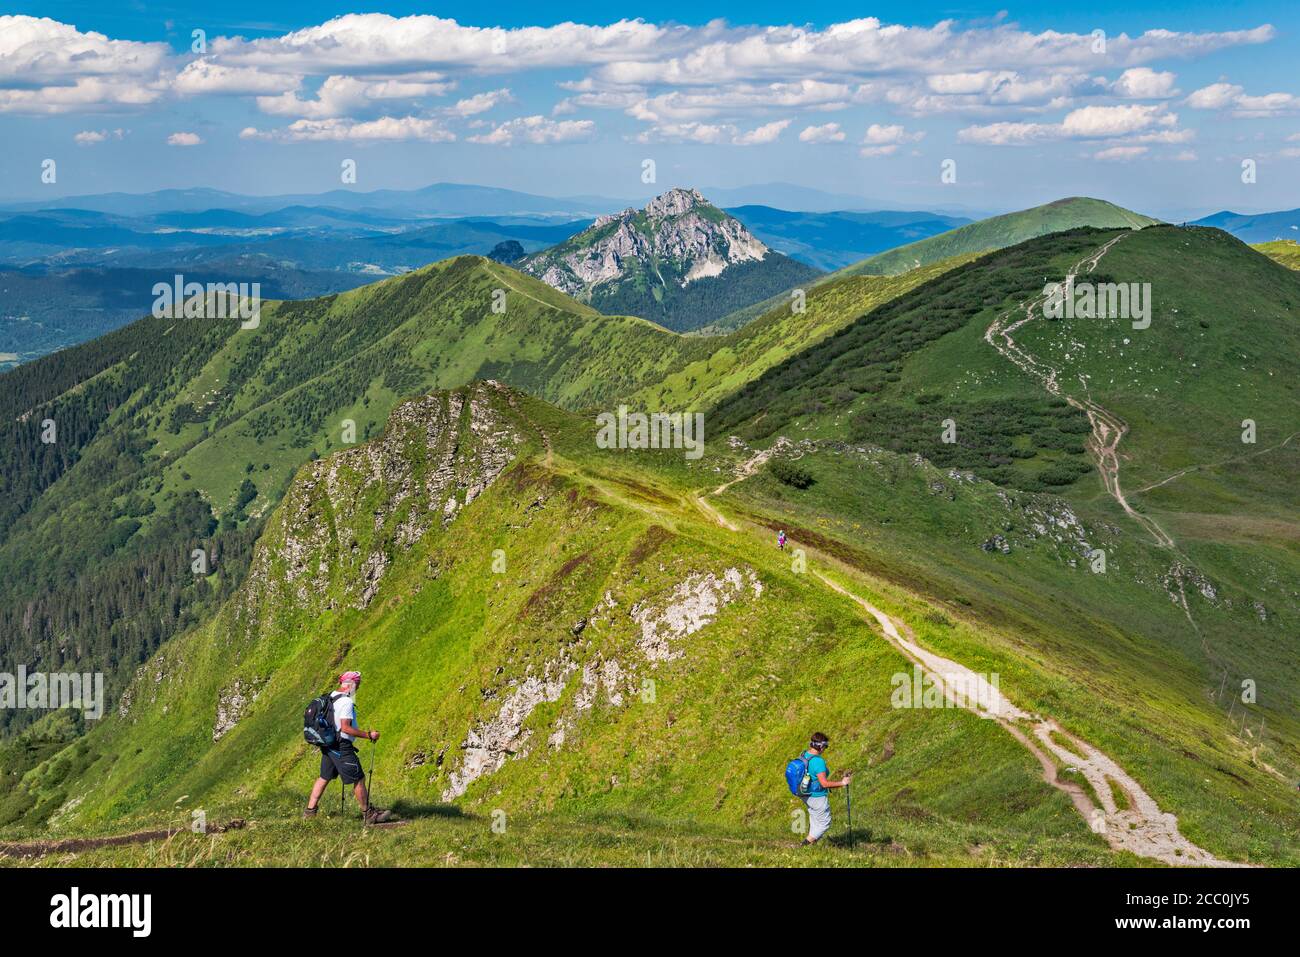 Velky Rozsutec mountain in far distance, Stoh massif on right, hikers, view NE from summit of Chleb, Mala Fatra National Park, Zilina Region, Slovakia Stock Photo